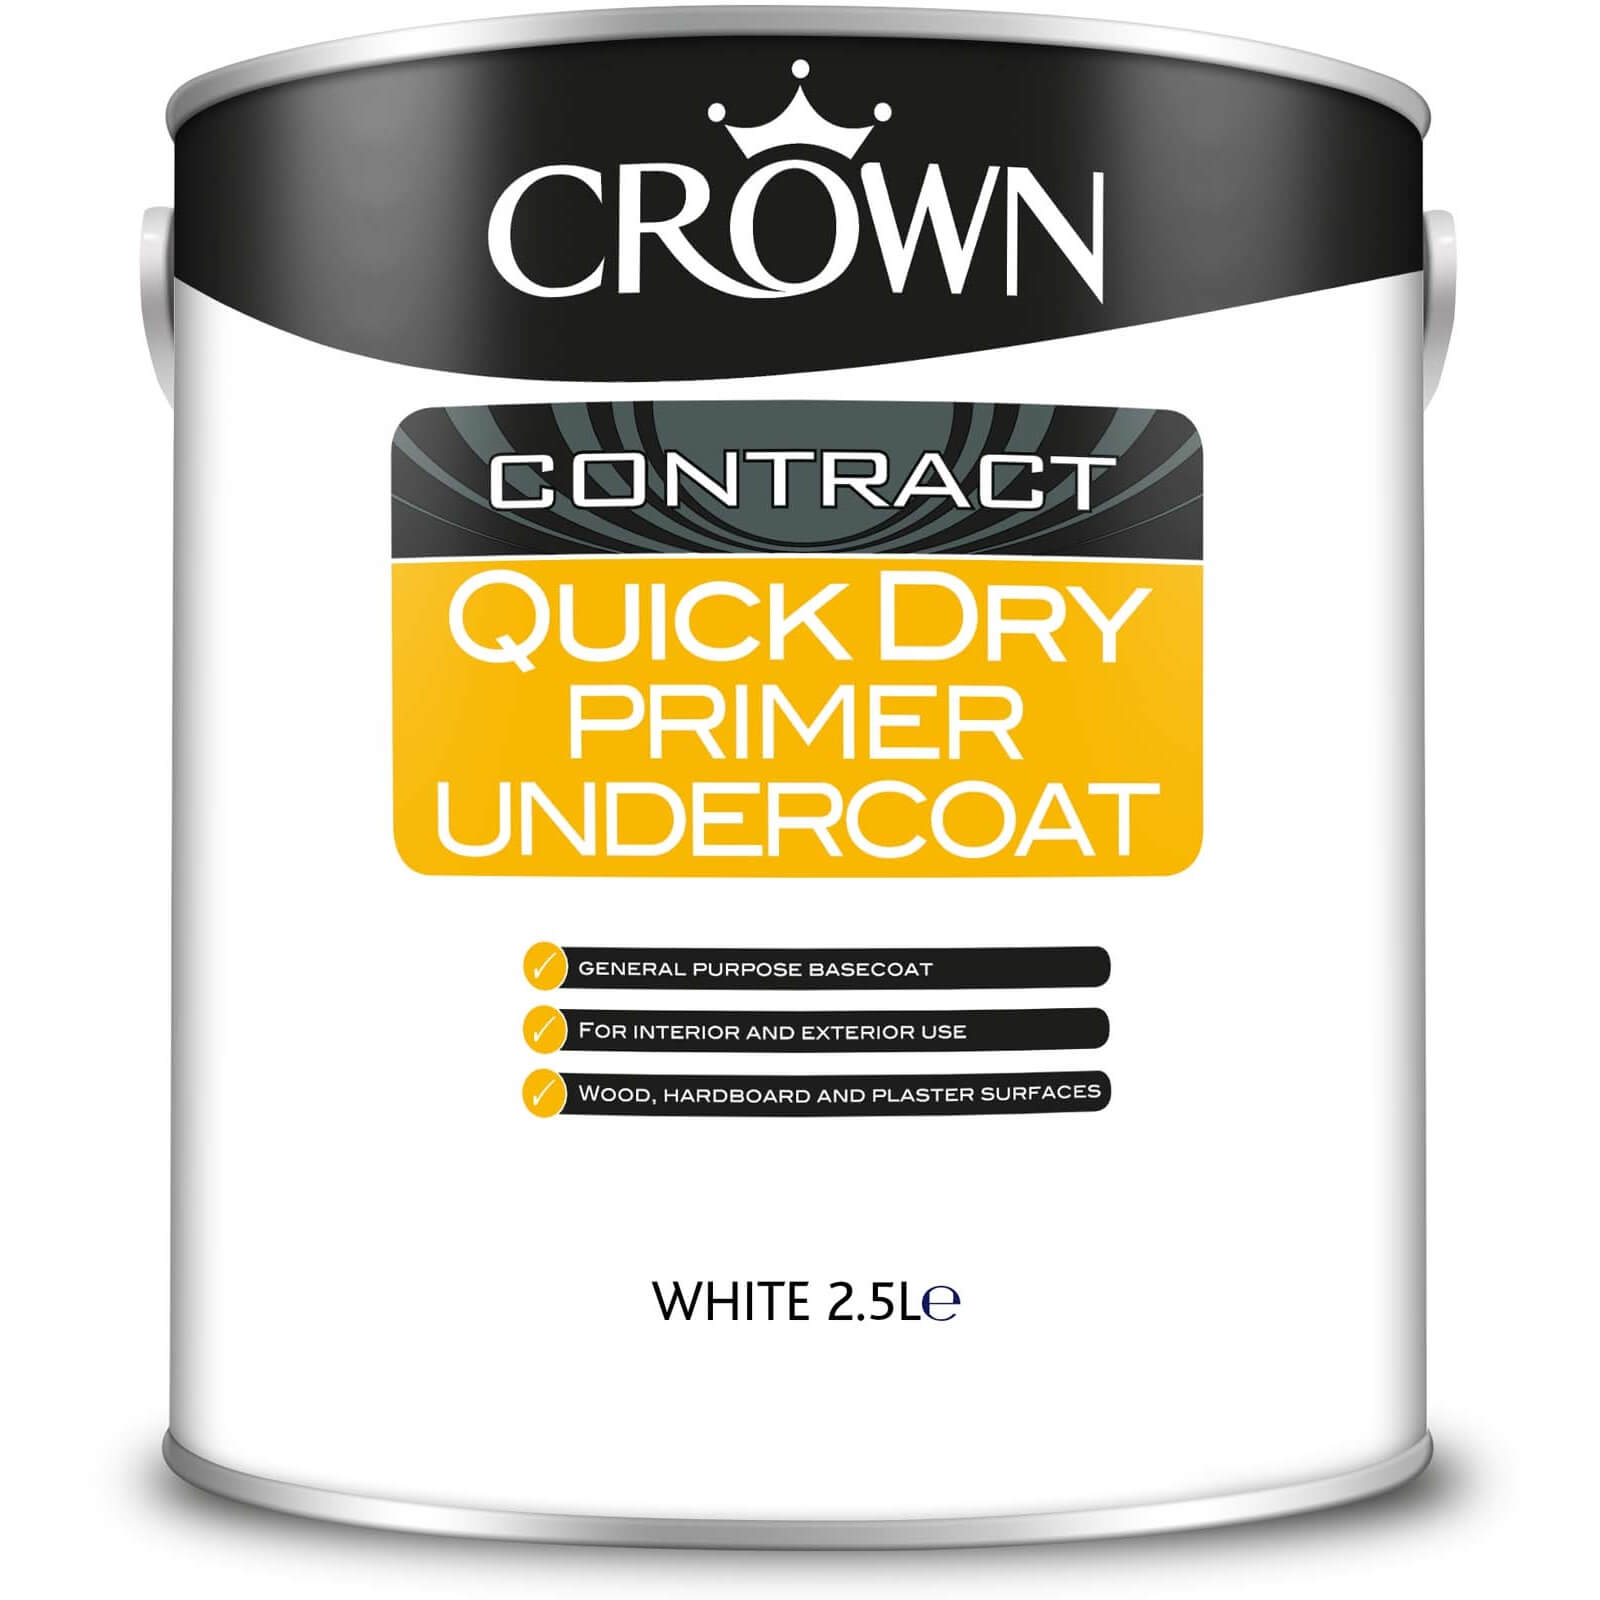 Crown Contract Quick Drying Primer & Undercoat White Paint - 2.5L